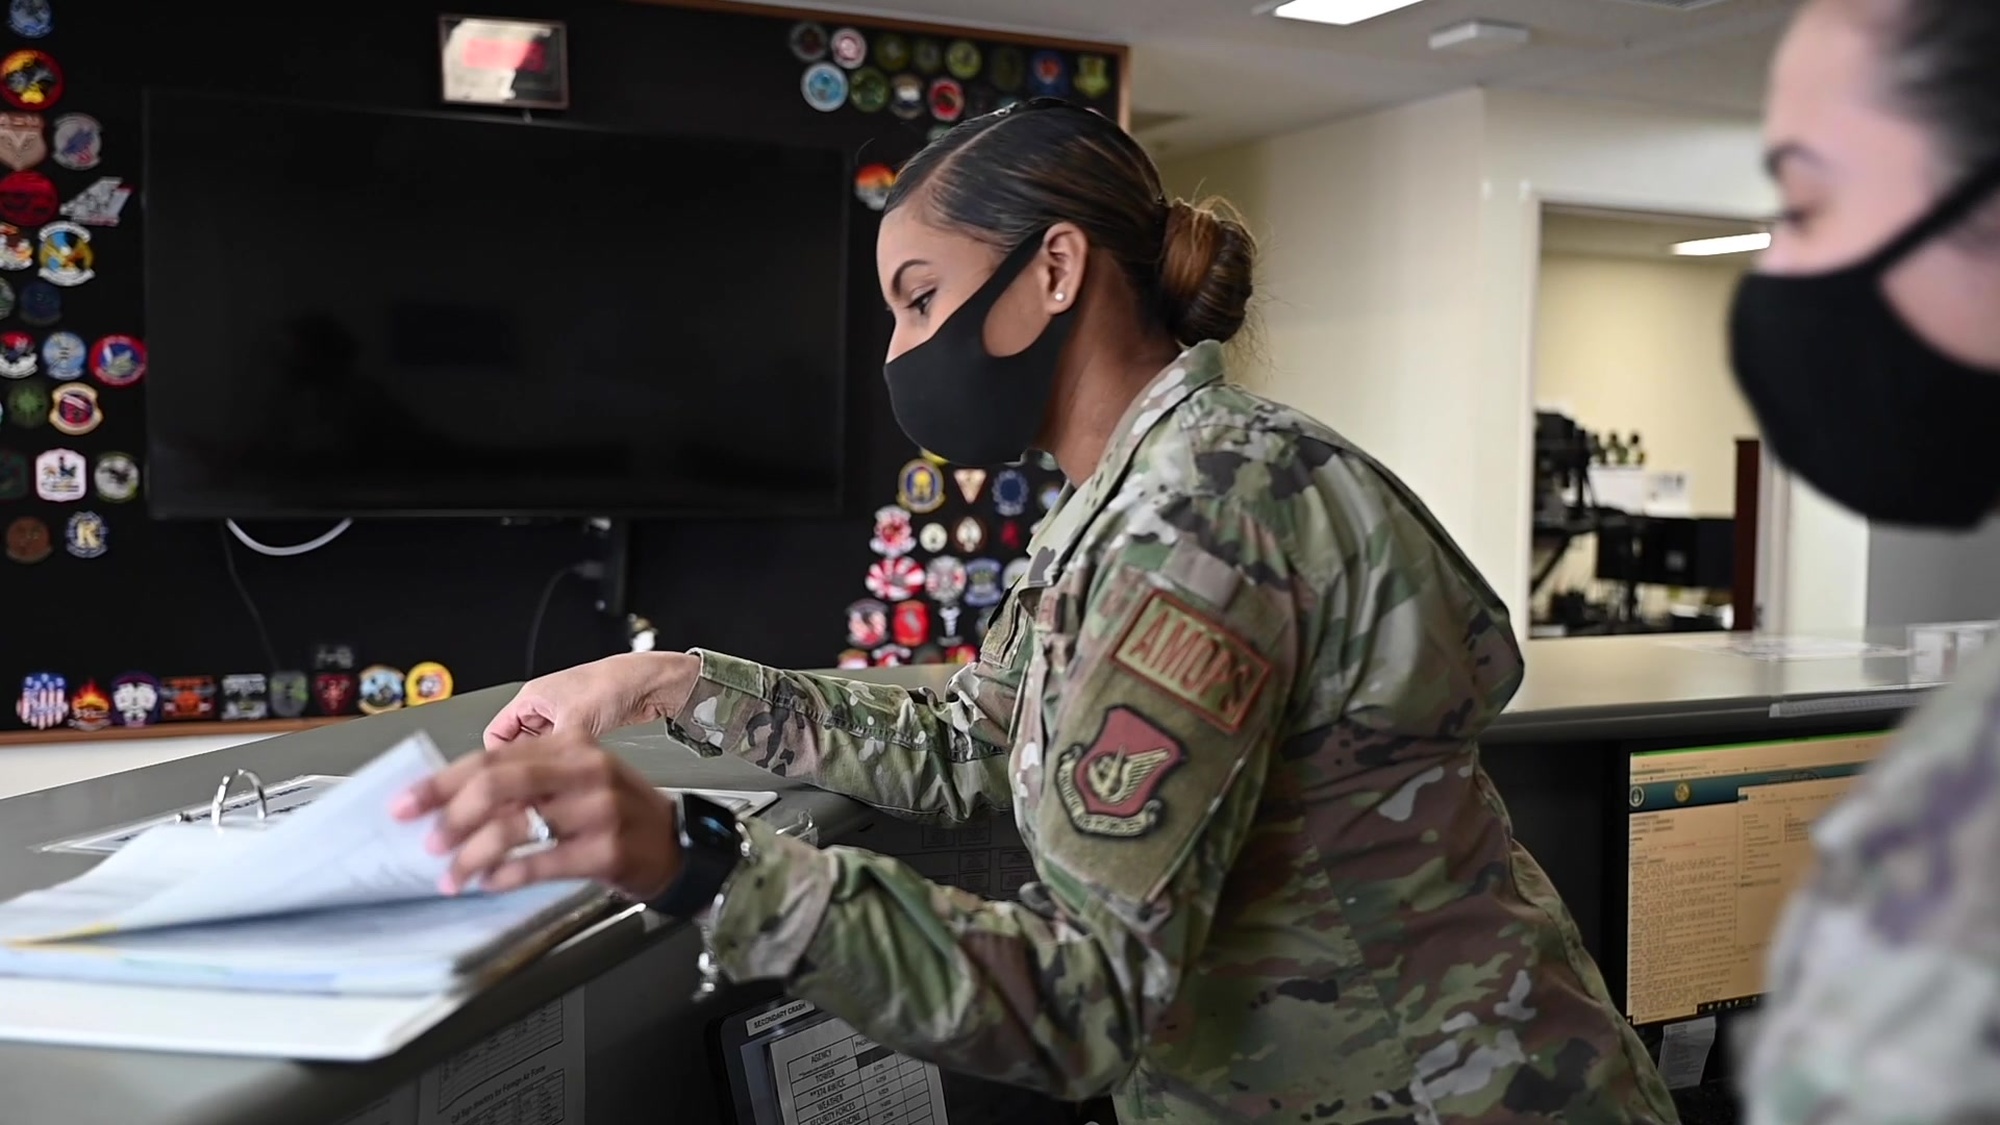 March is Women's History month. Female Airmen at Yokota talk about what Women's History month means to them and how we can keep making history moving forward.